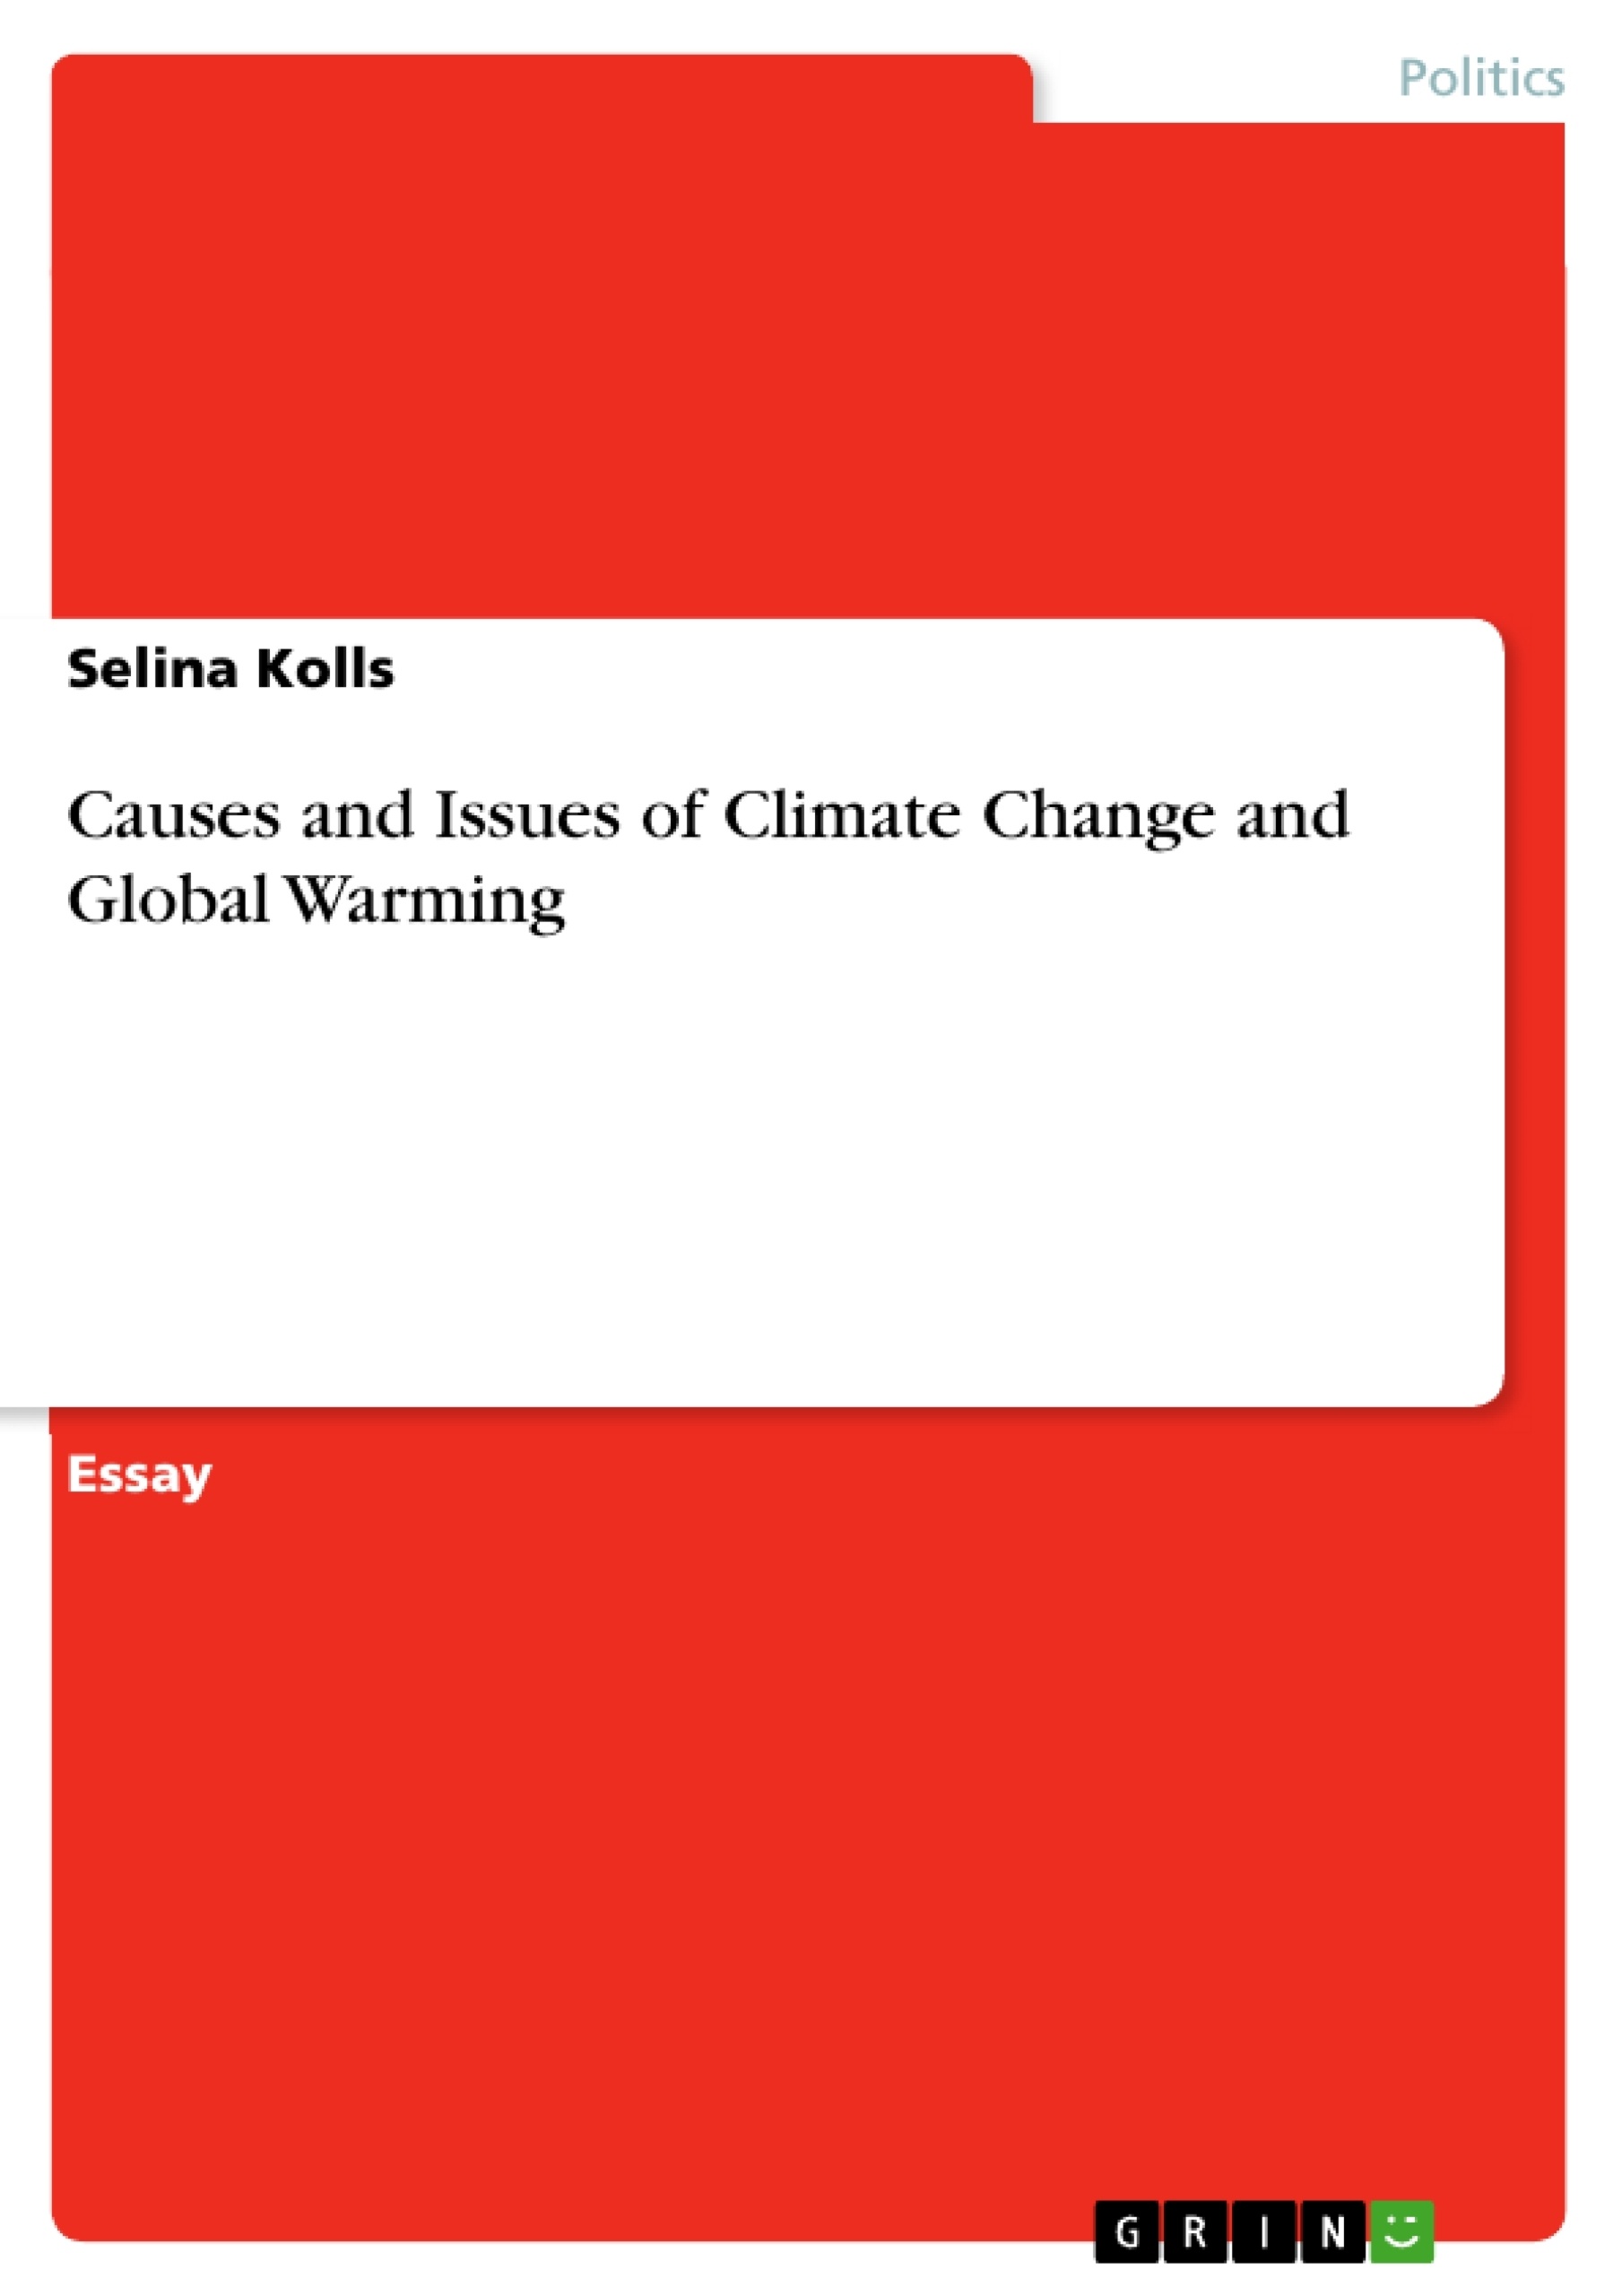 Título: Causes and Issues of Climate Change and Global Warming